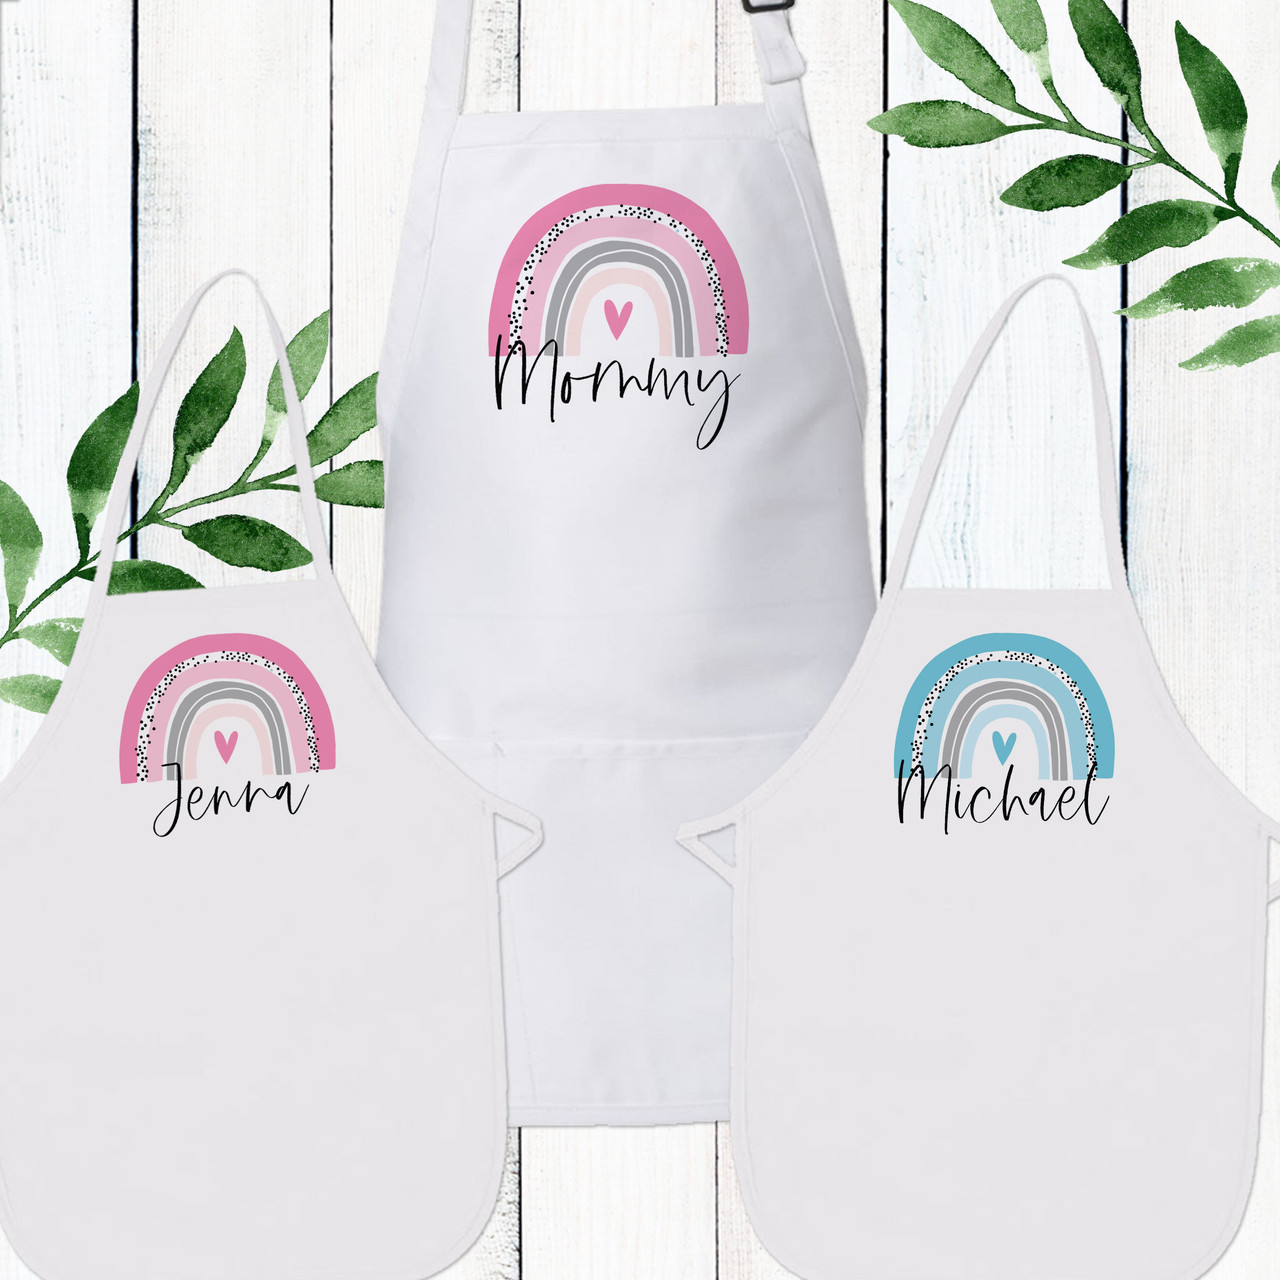 https://cdn11.bigcommerce.com/s-5grzuu6/images/stencil/1280x1280/products/6472/52191/Boho-Rainbow_Matching-Personalized-Aprons_for_Adult_and_Kids__20282.1681854901.jpg?c=2